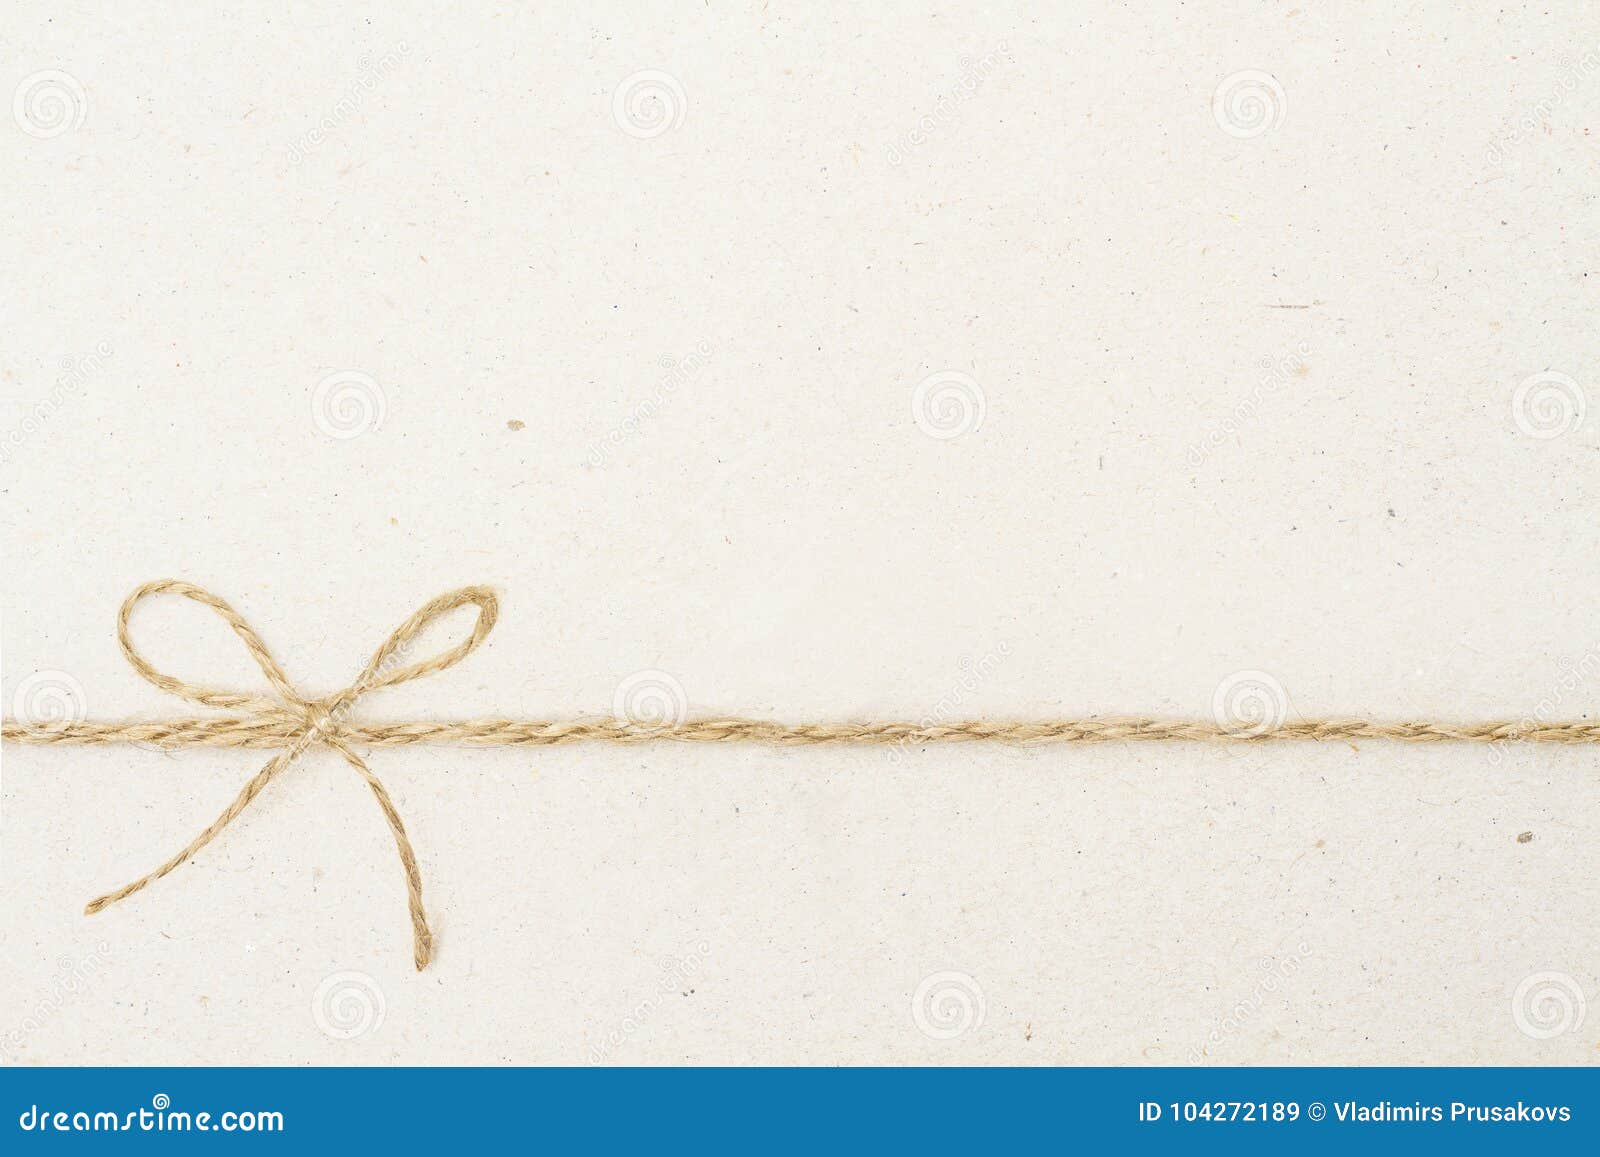 Cardboard Paper Background with Bow Rope, Carton Vintage Twine Stock Image  - Image of horizontal, line: 104272189